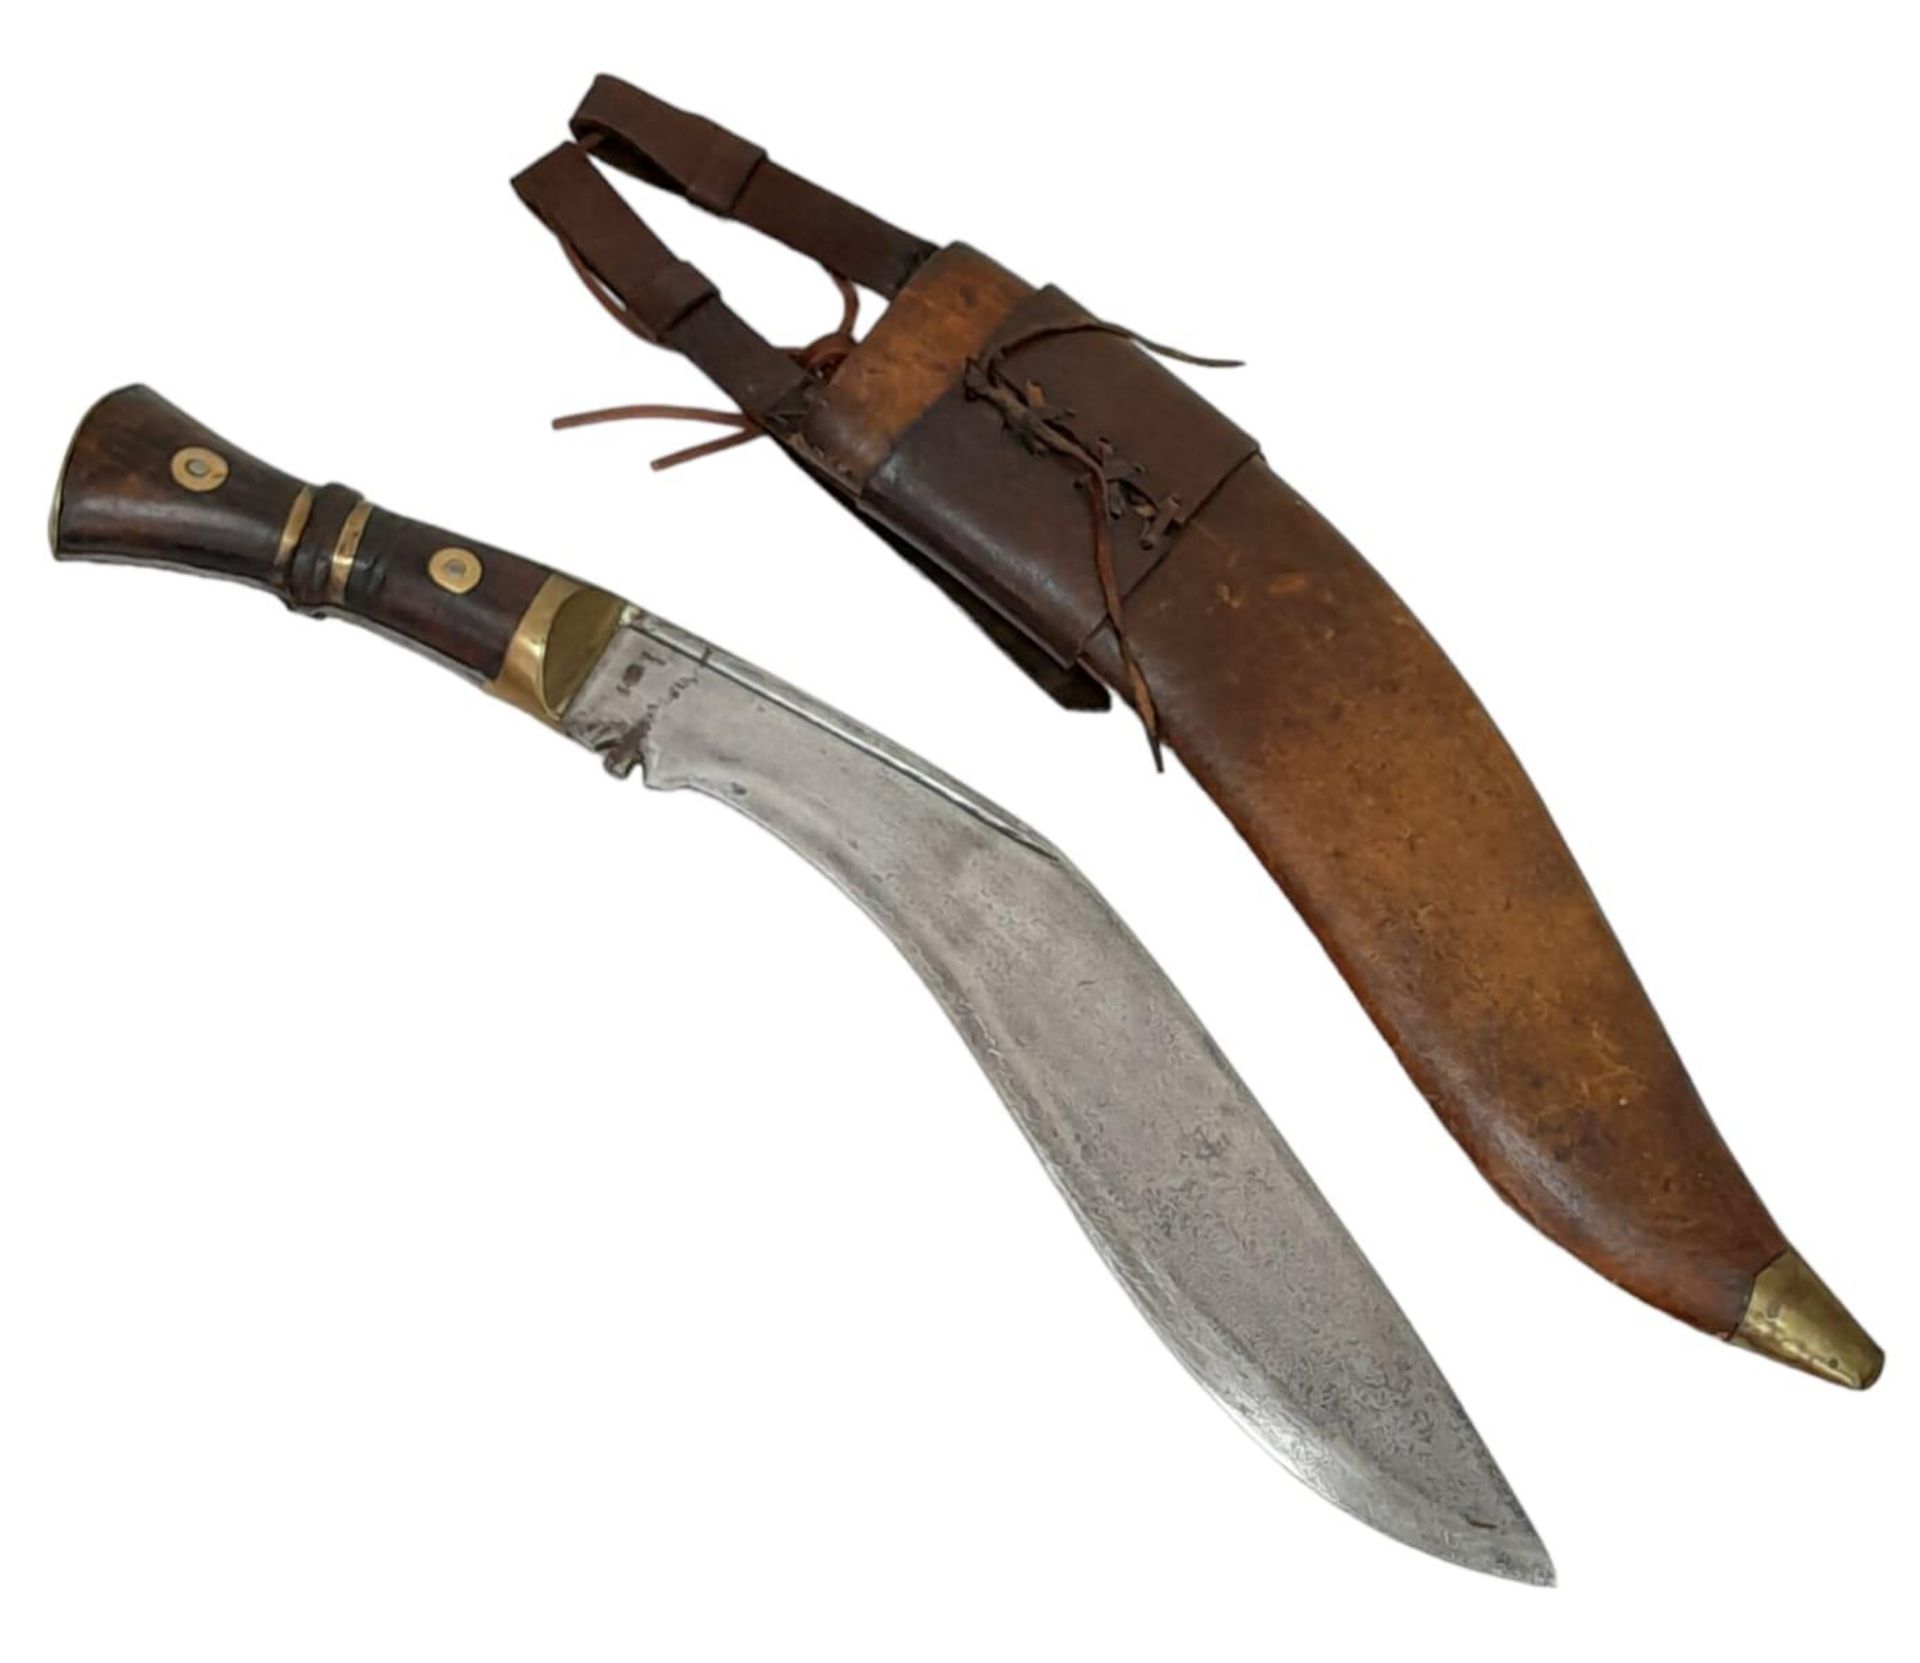 WW1 Gurkha Kukri Knife Dated 1917. Made in Cossipore for the Indian War Department. Comes in a